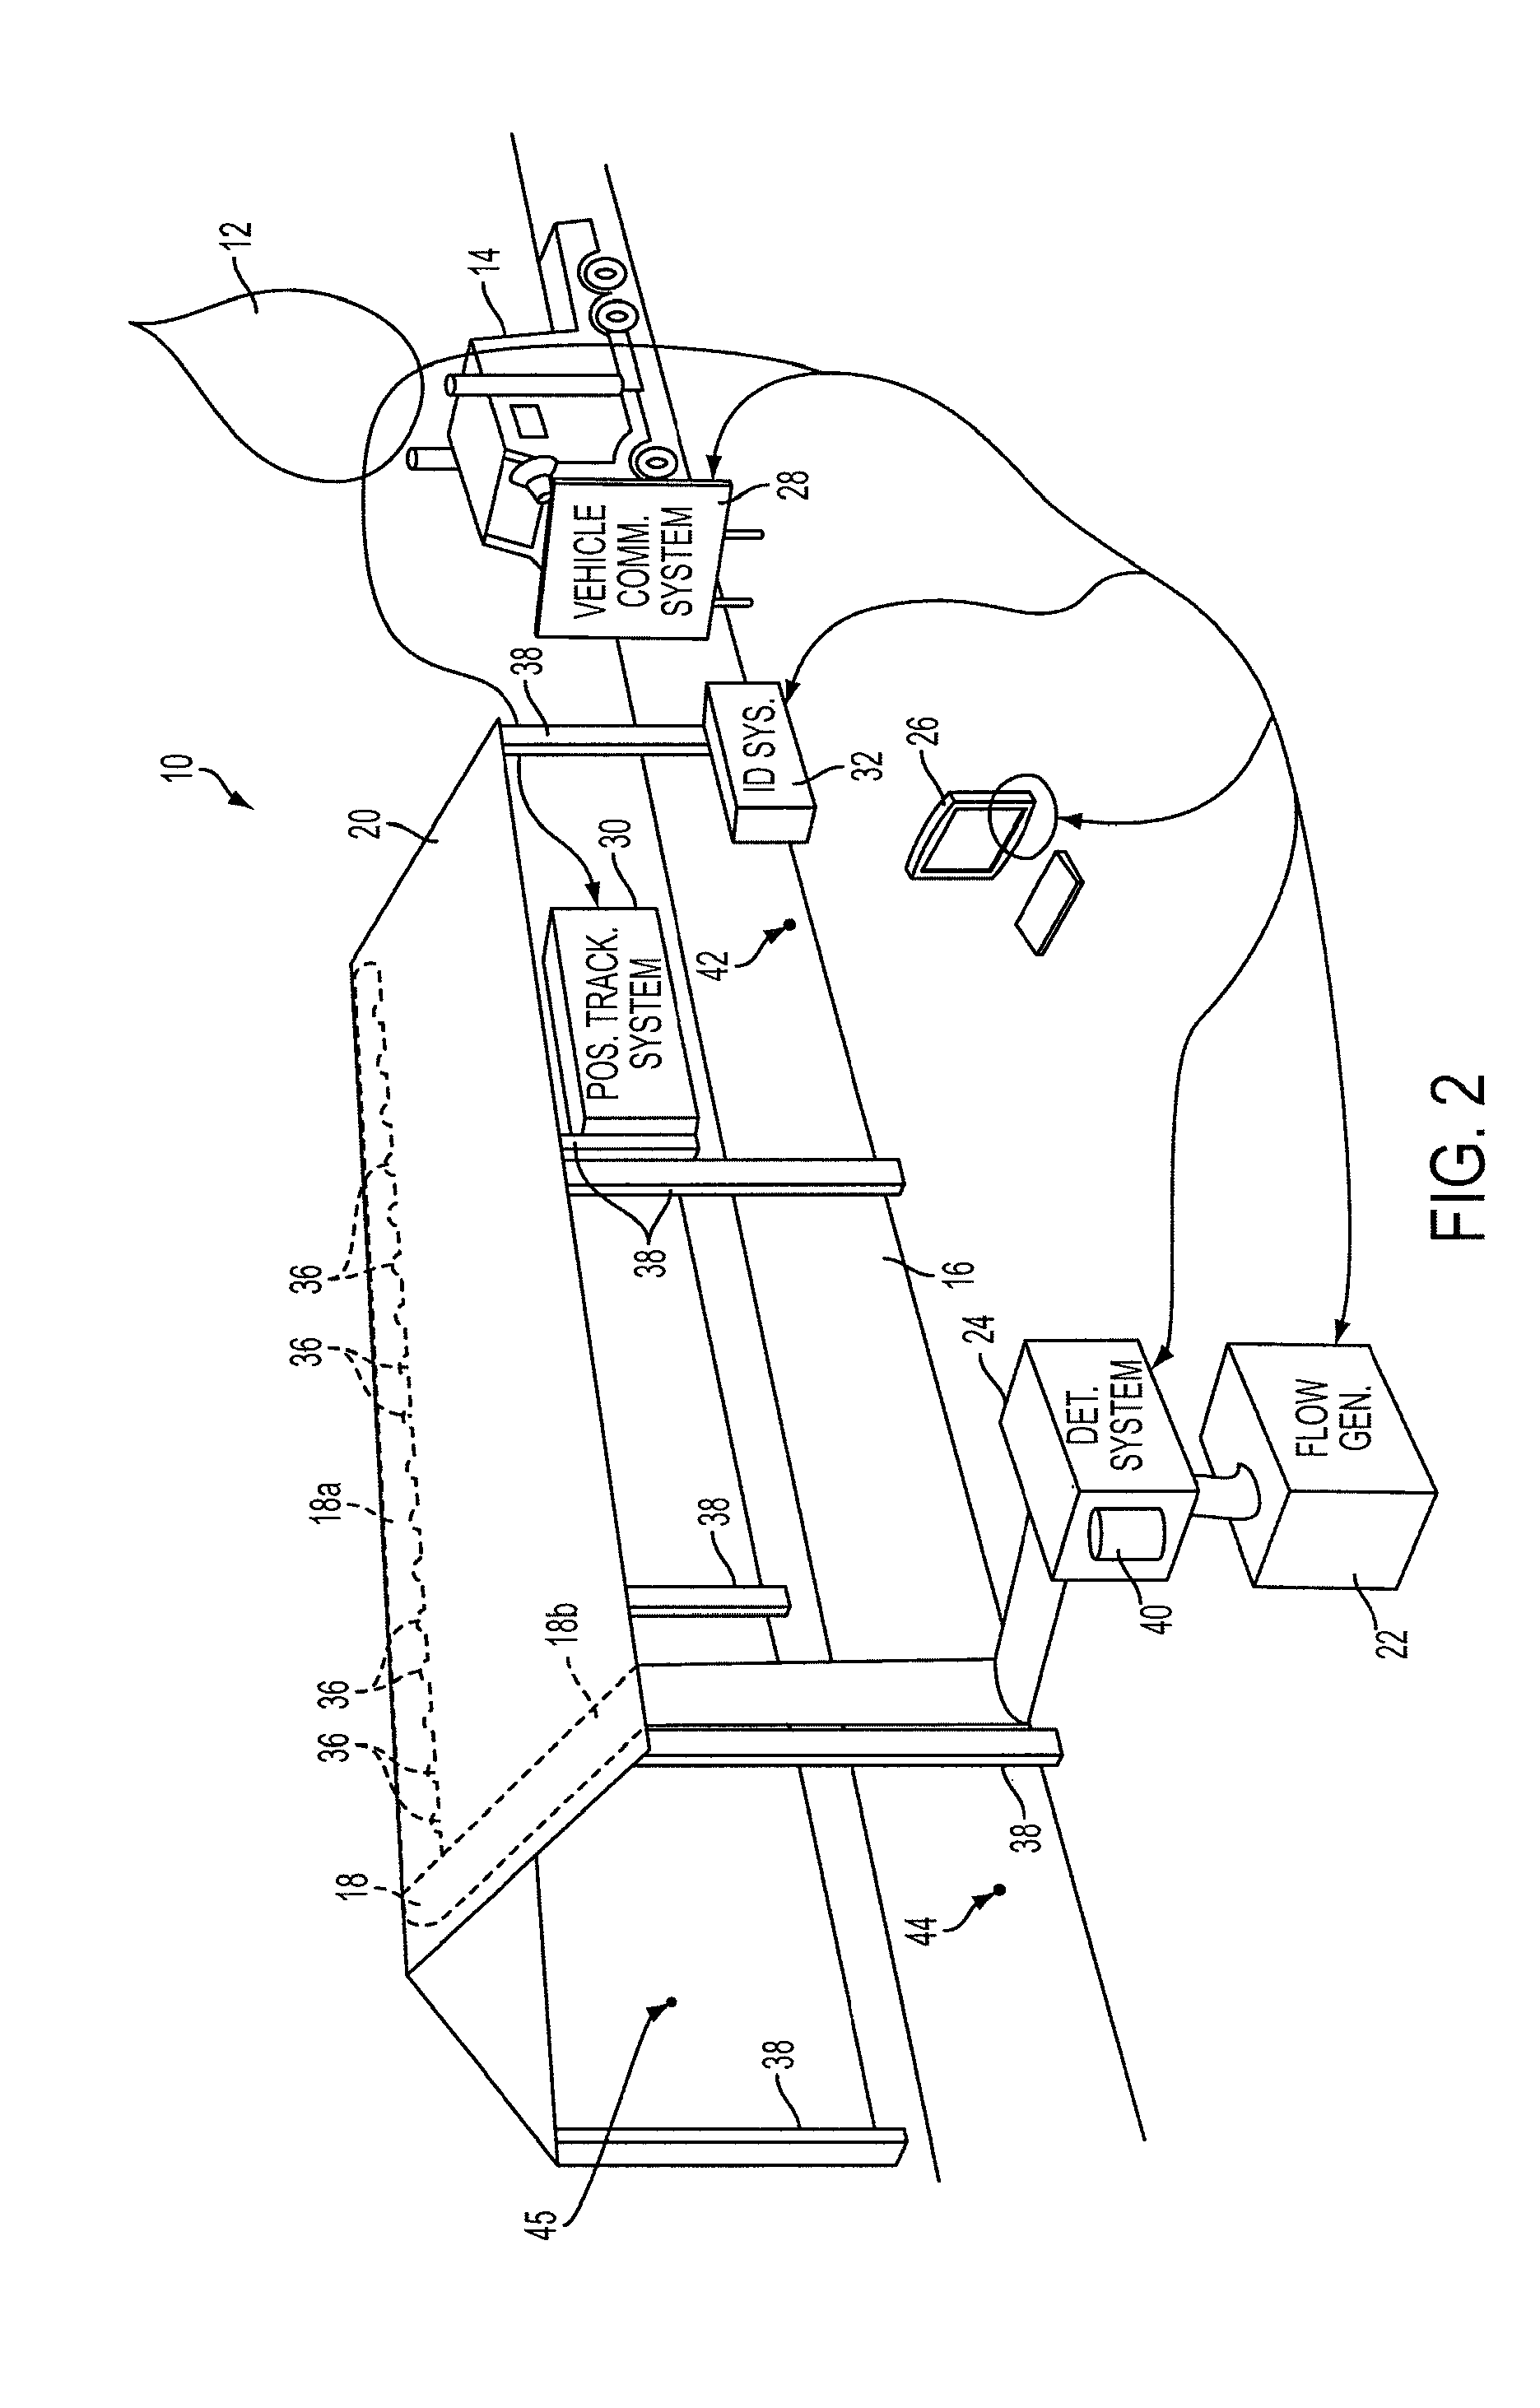 System and method for quantifying the presence of components in the exhaust of commercial and/or heavy-duty vehicles